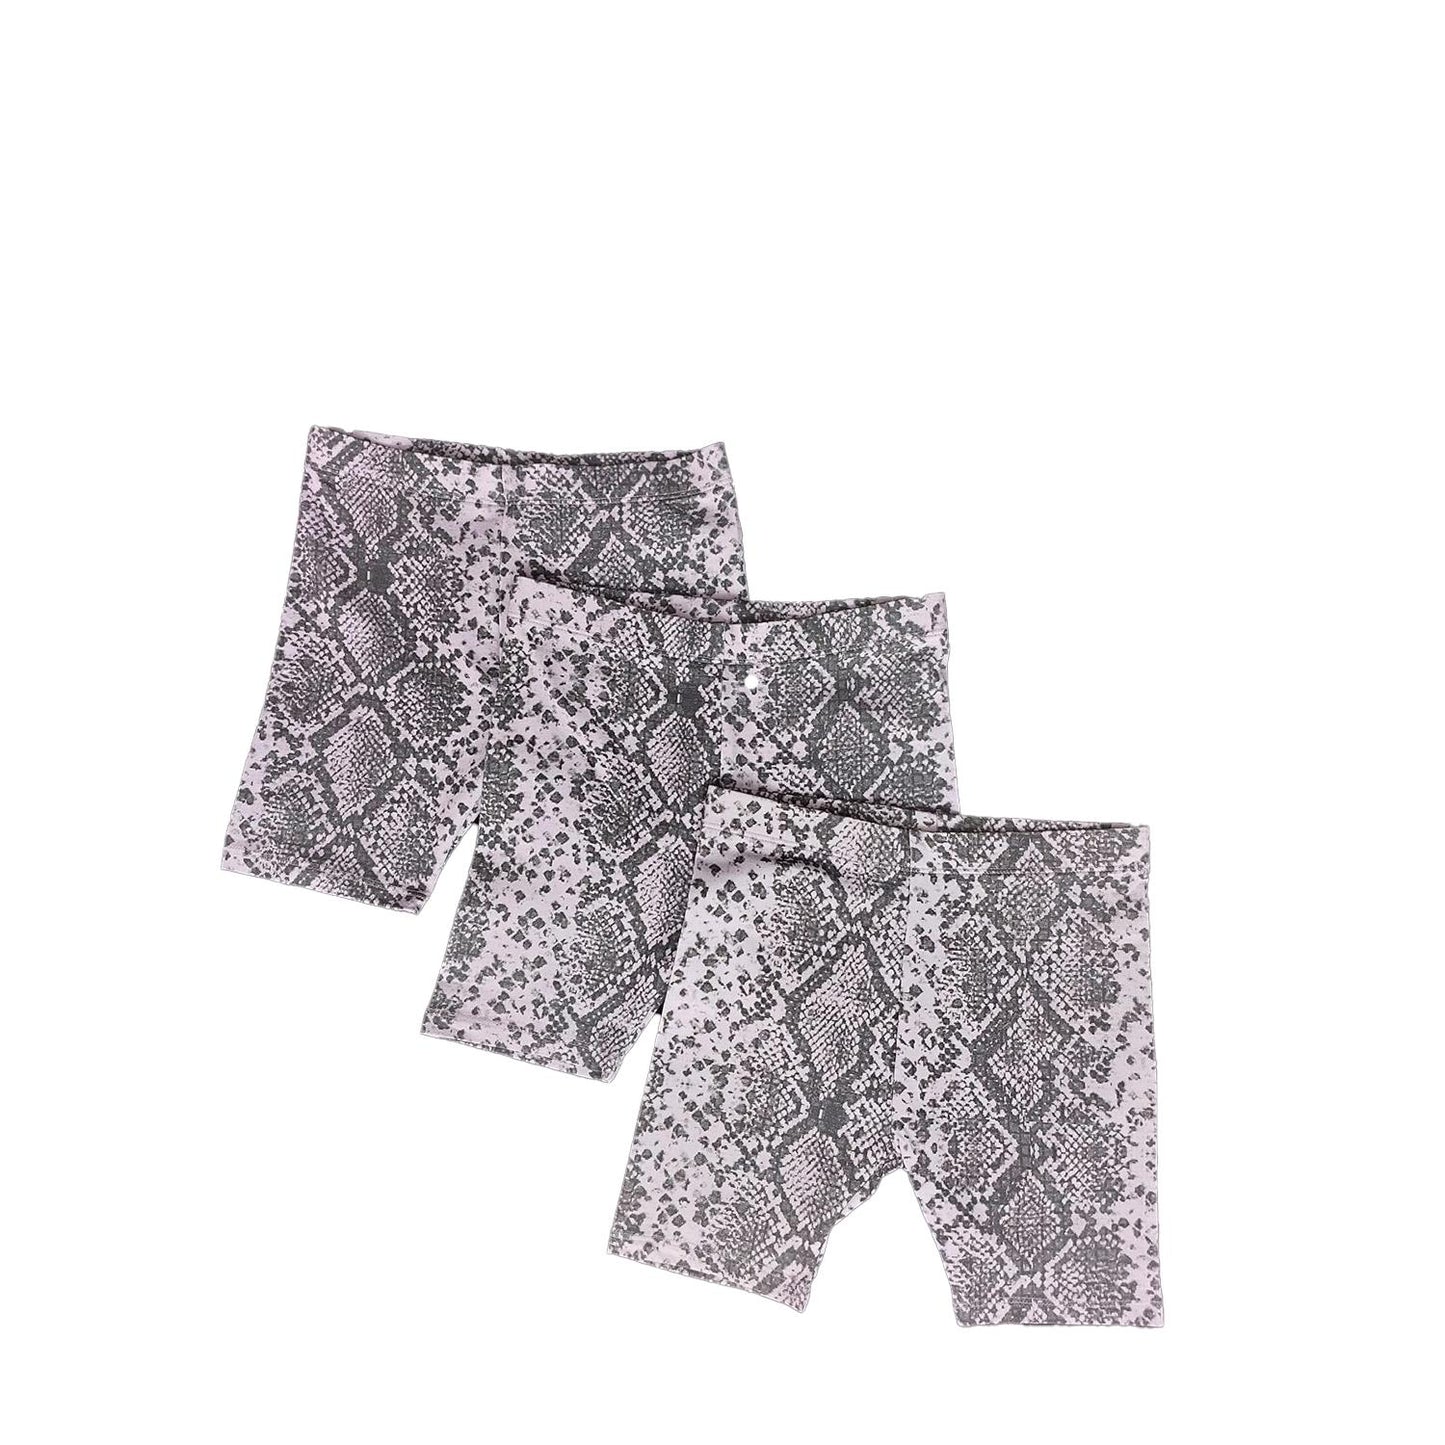 3-Pack Girls' Shorts Cotton Rich Snake Print Summer Holiday Multipack Brand New